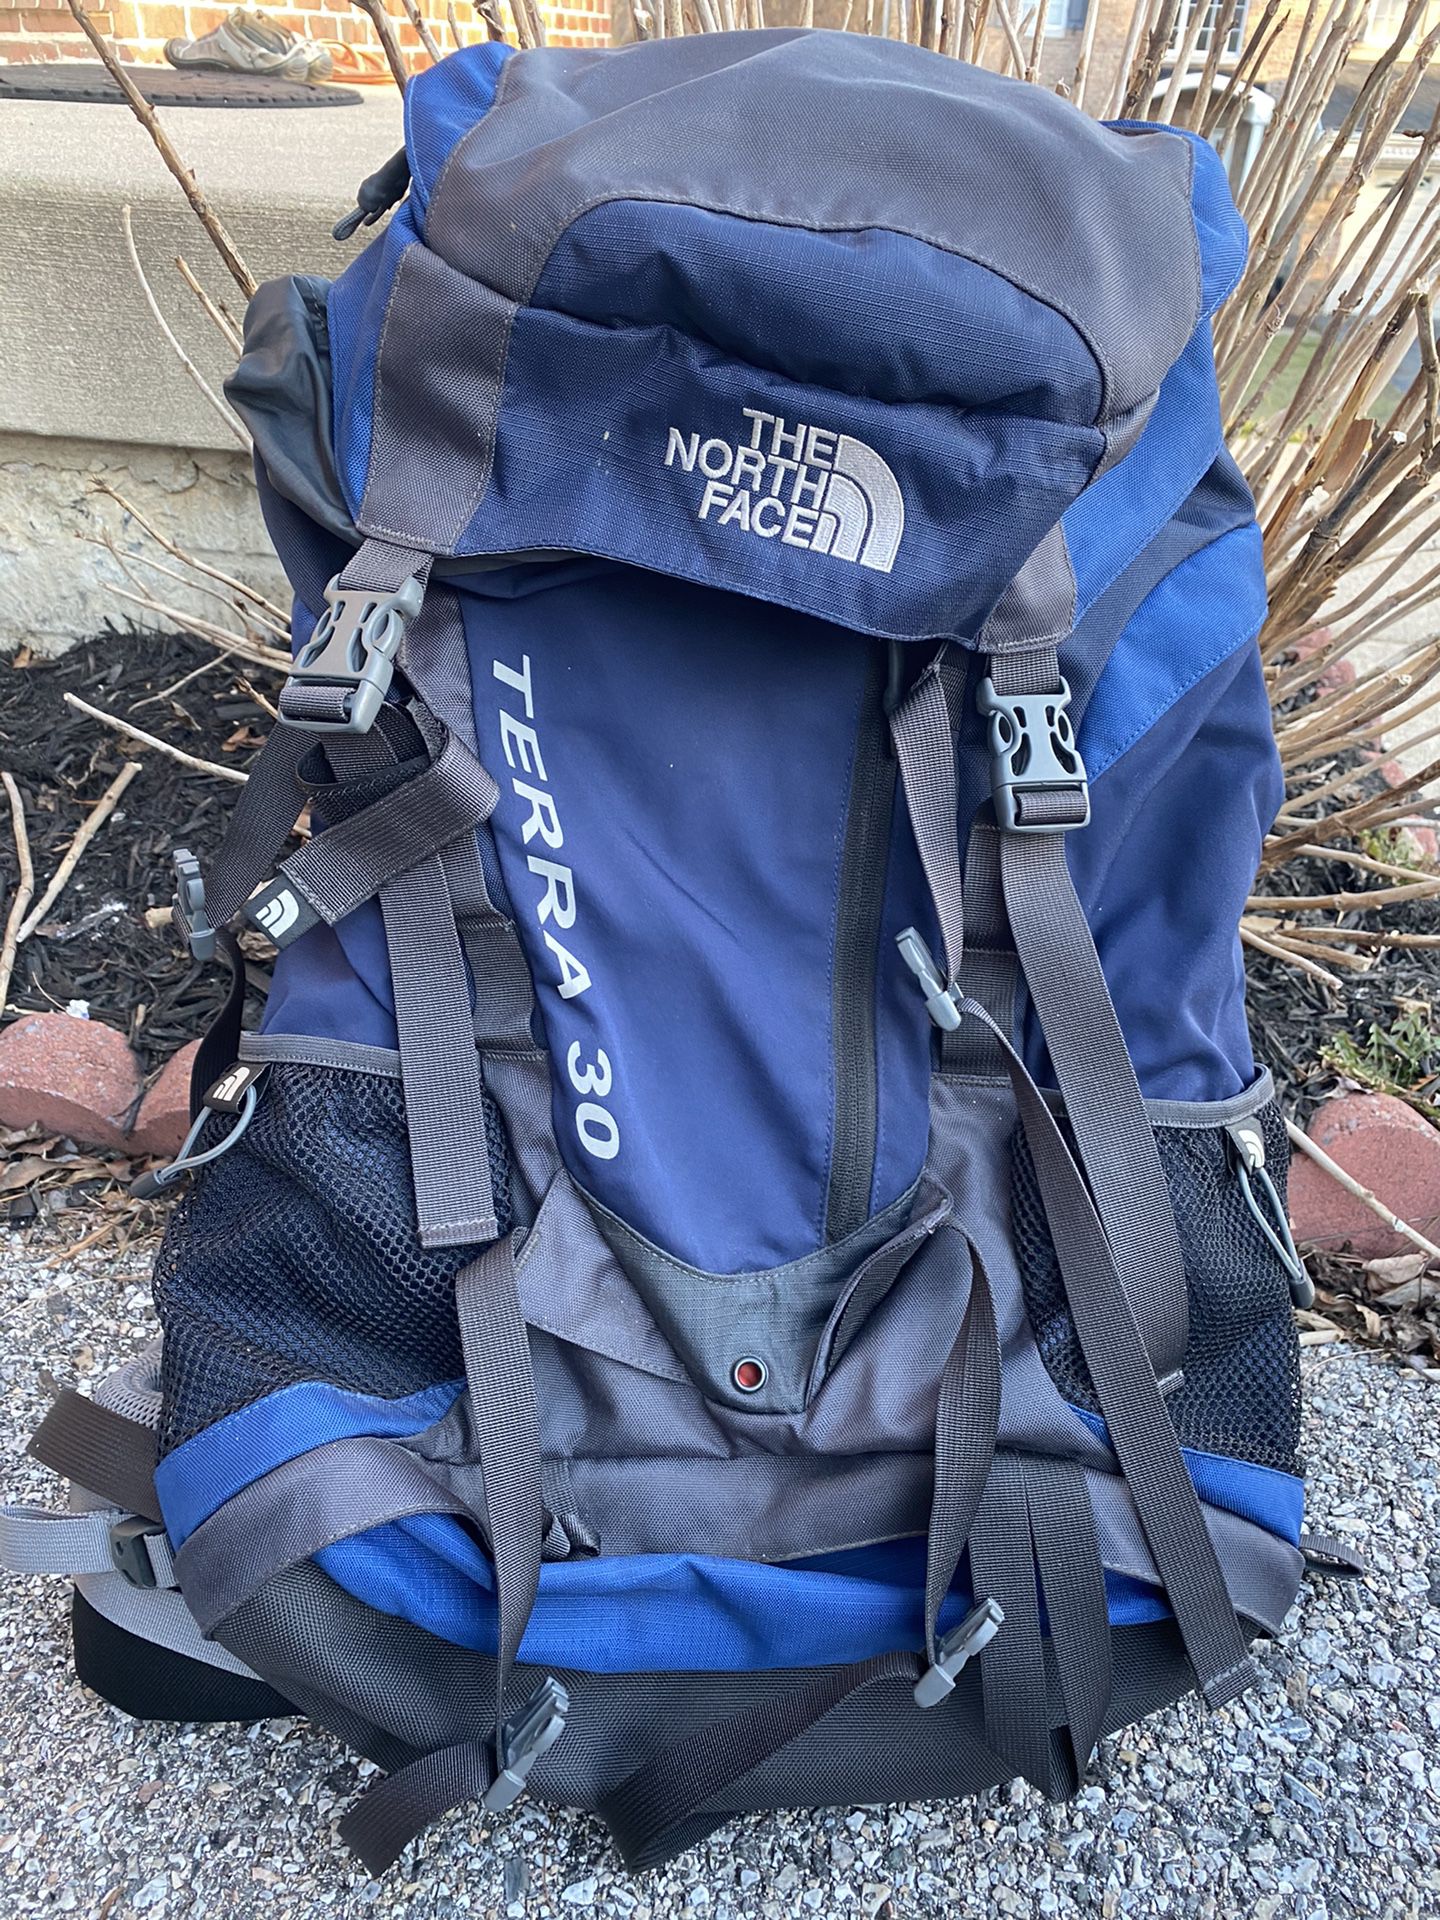 Hiking backpack(Very high quality and brand, Northface Terra 30 in like new condition. Very clean inside and out)